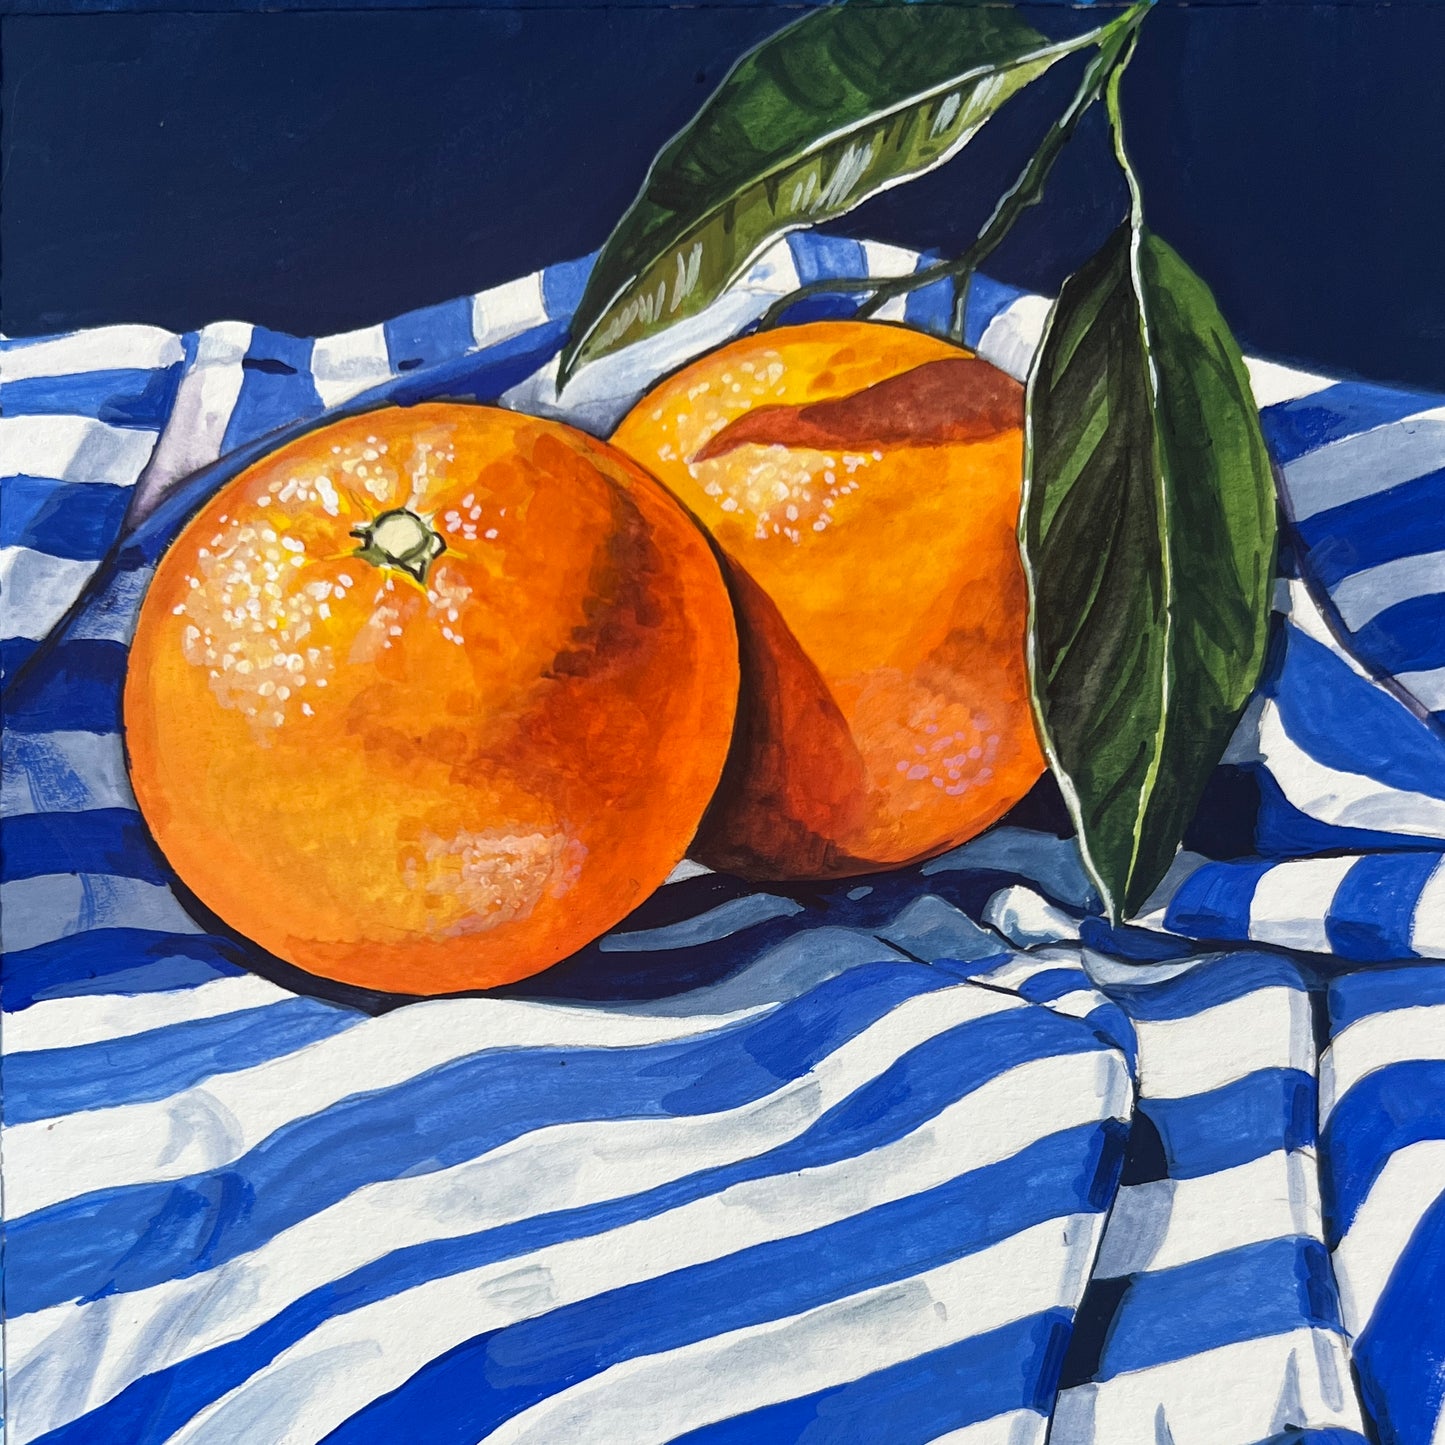 Oranges on Blue and White